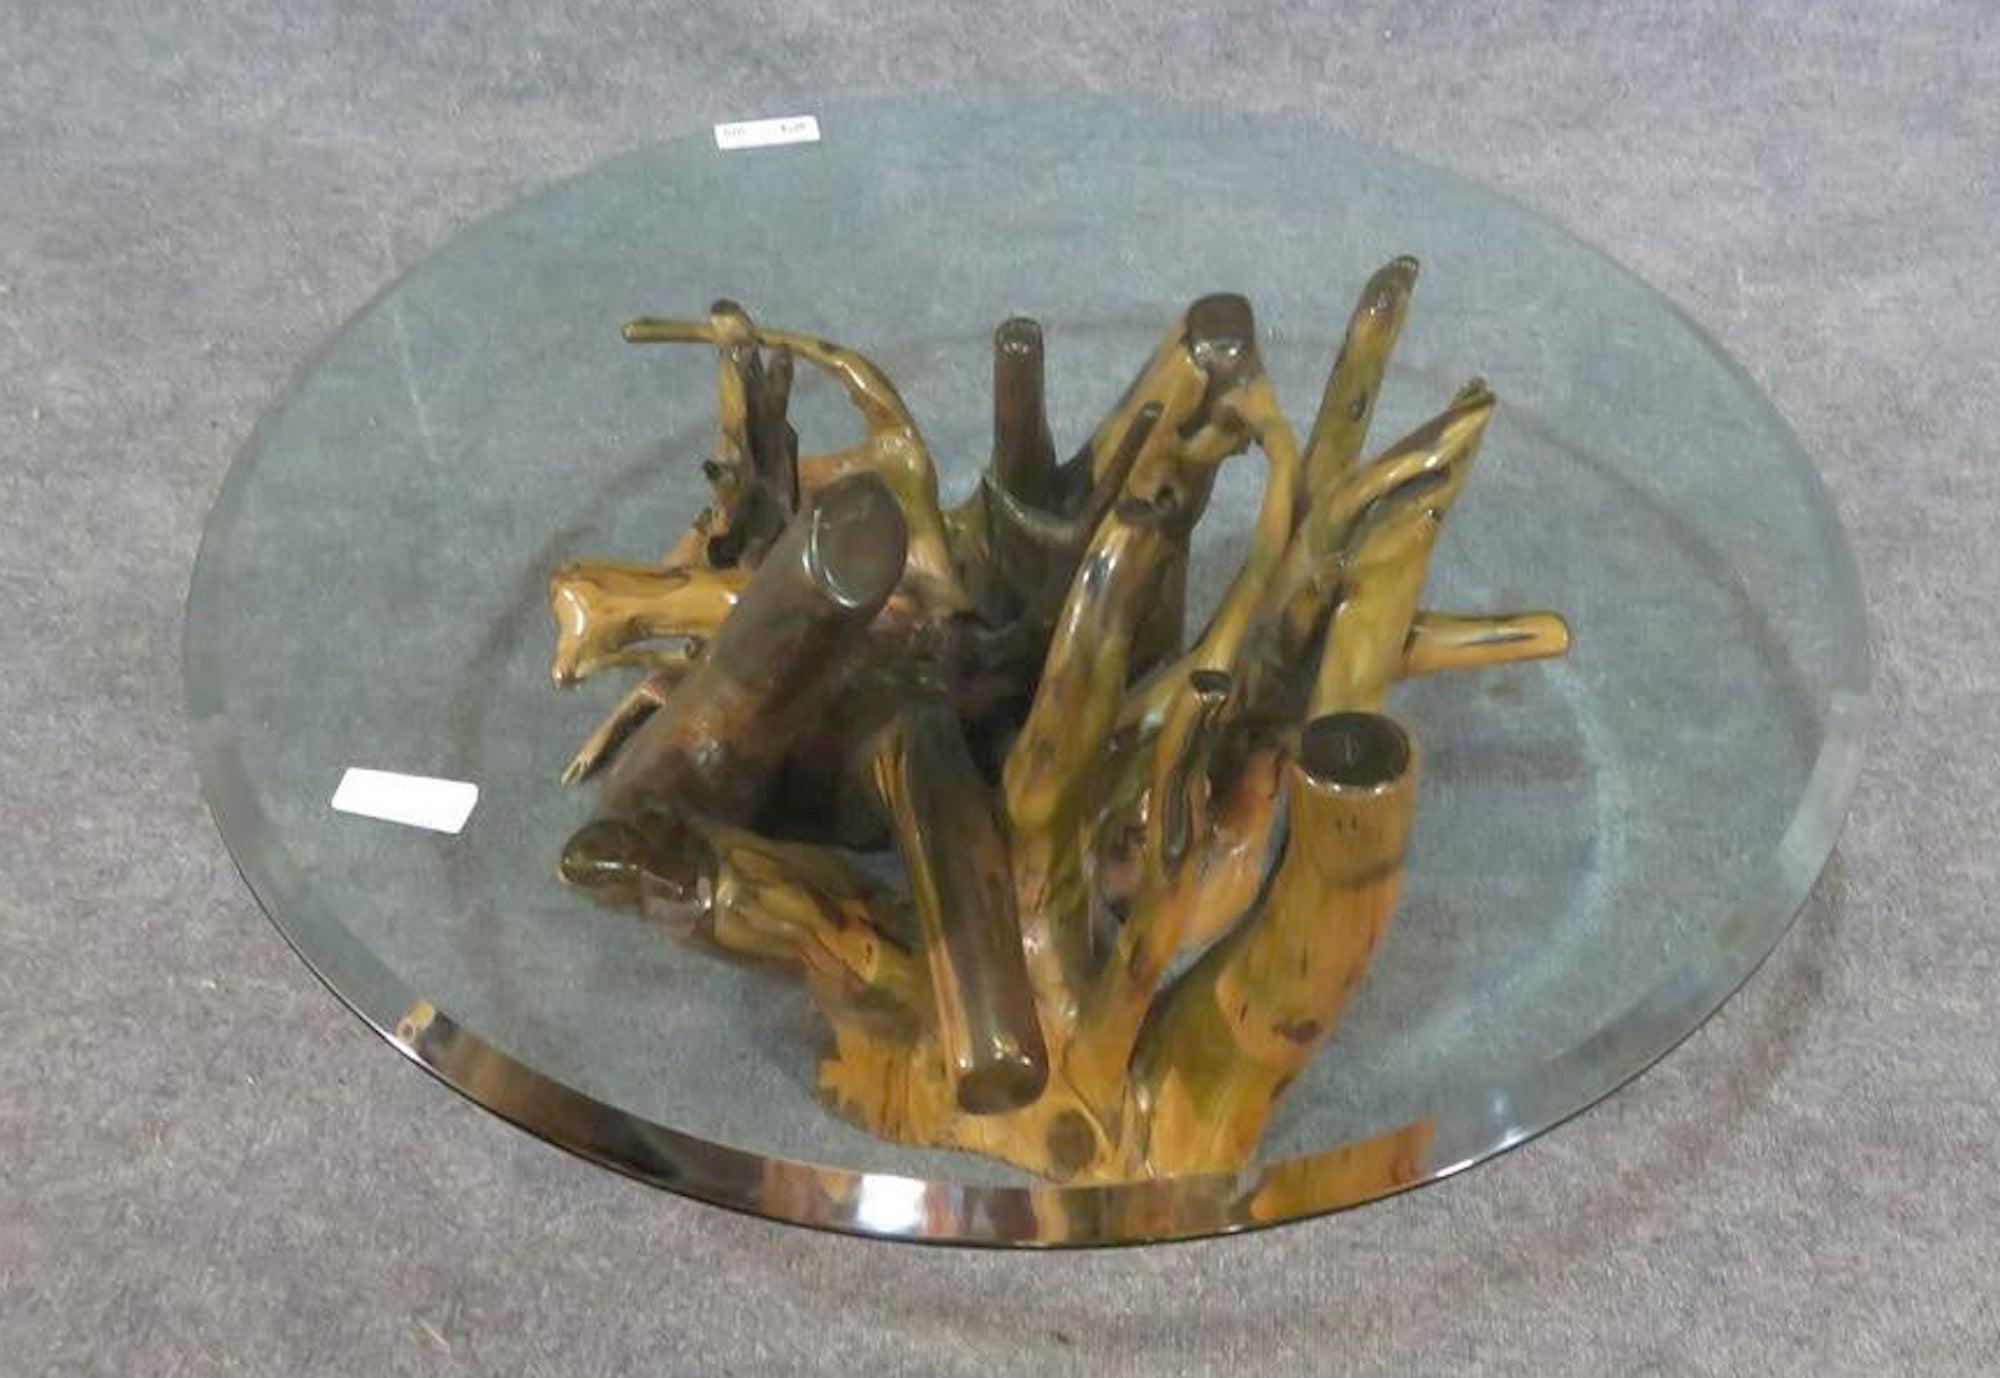 Beautiful root base coffee table with round glass top.
(Please confirm item location - NY or NJ - with dealer).
       